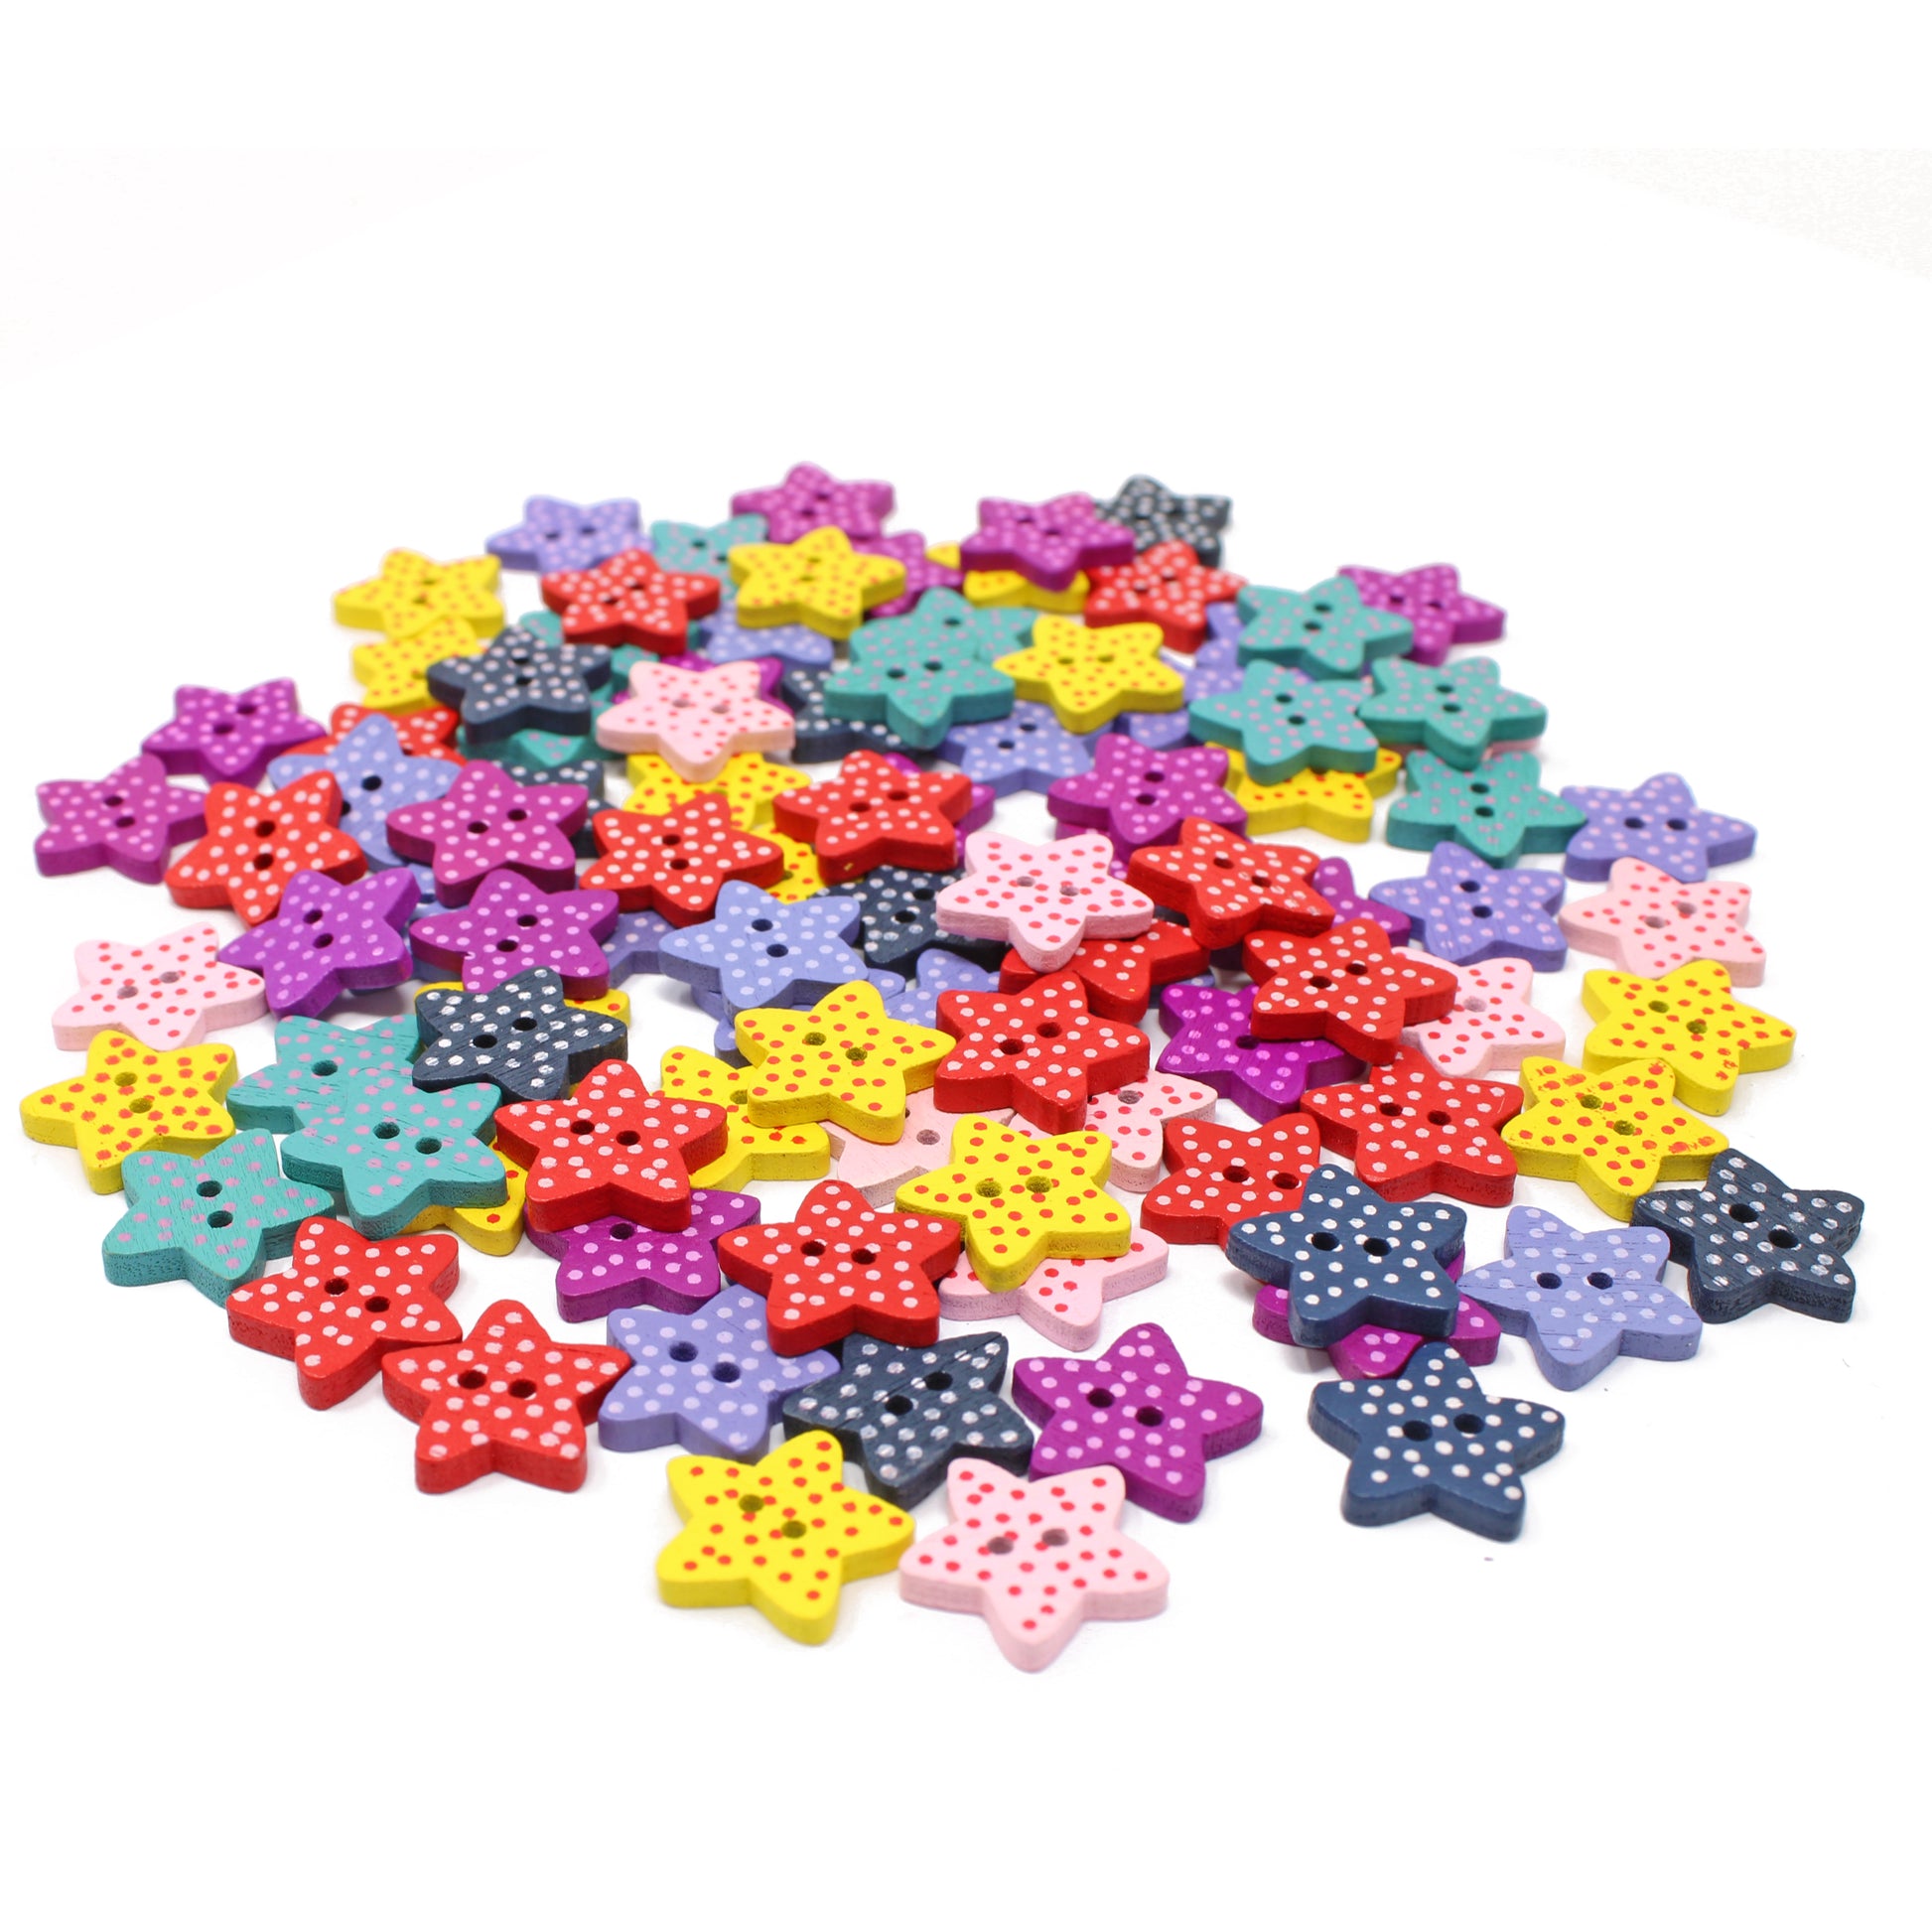 Star 100 Mixed Wooden & Acrylic Buttons